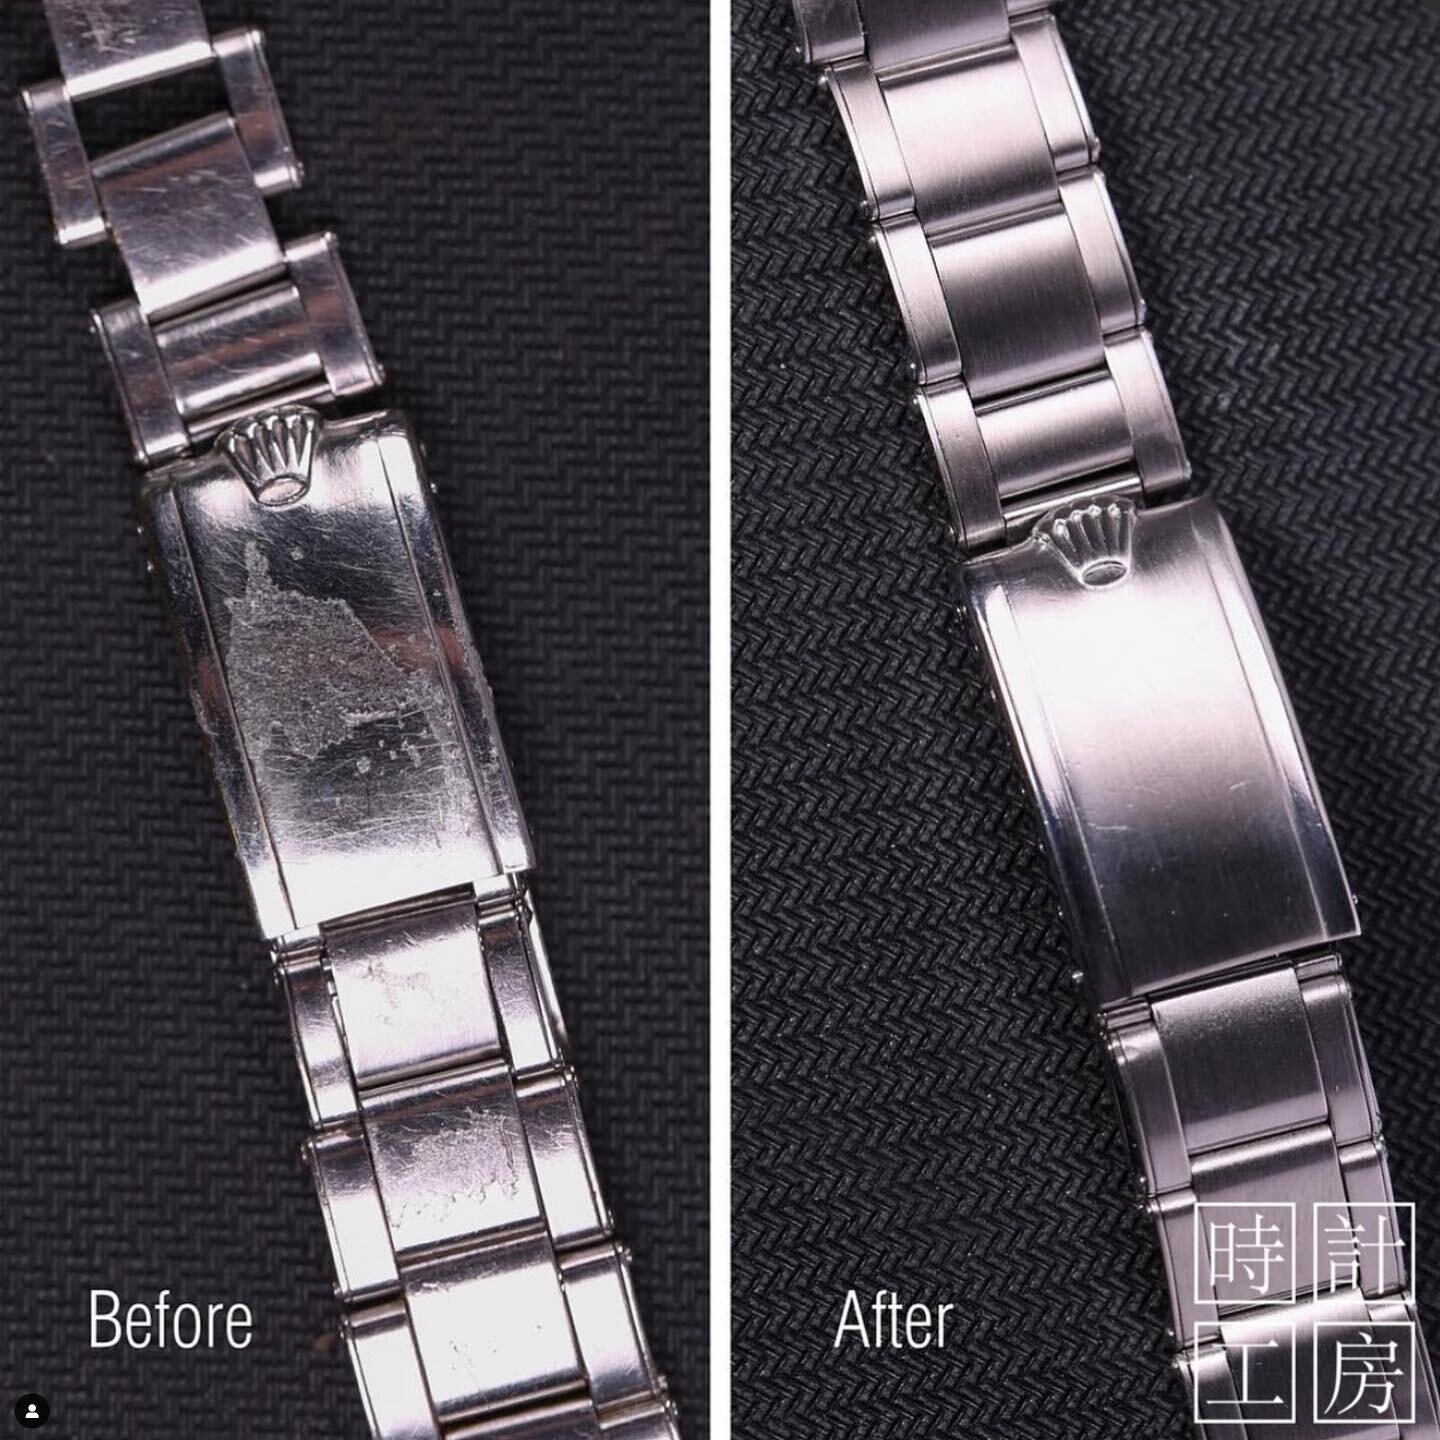 ✅Band Tightened ✅ Dents Fixed ✅ Links Repaired ✅ Structure Enhanced ✅ Polished and Refinished. 

👑 Rolex Metal Band Restoration Prices:

Steel - HK$1,950 / US$250 ++
Two Tone - HK$2,400 / US$295 ++ 
18K Gold - HK15,000 / US$1,950 ++ 

Exact price to